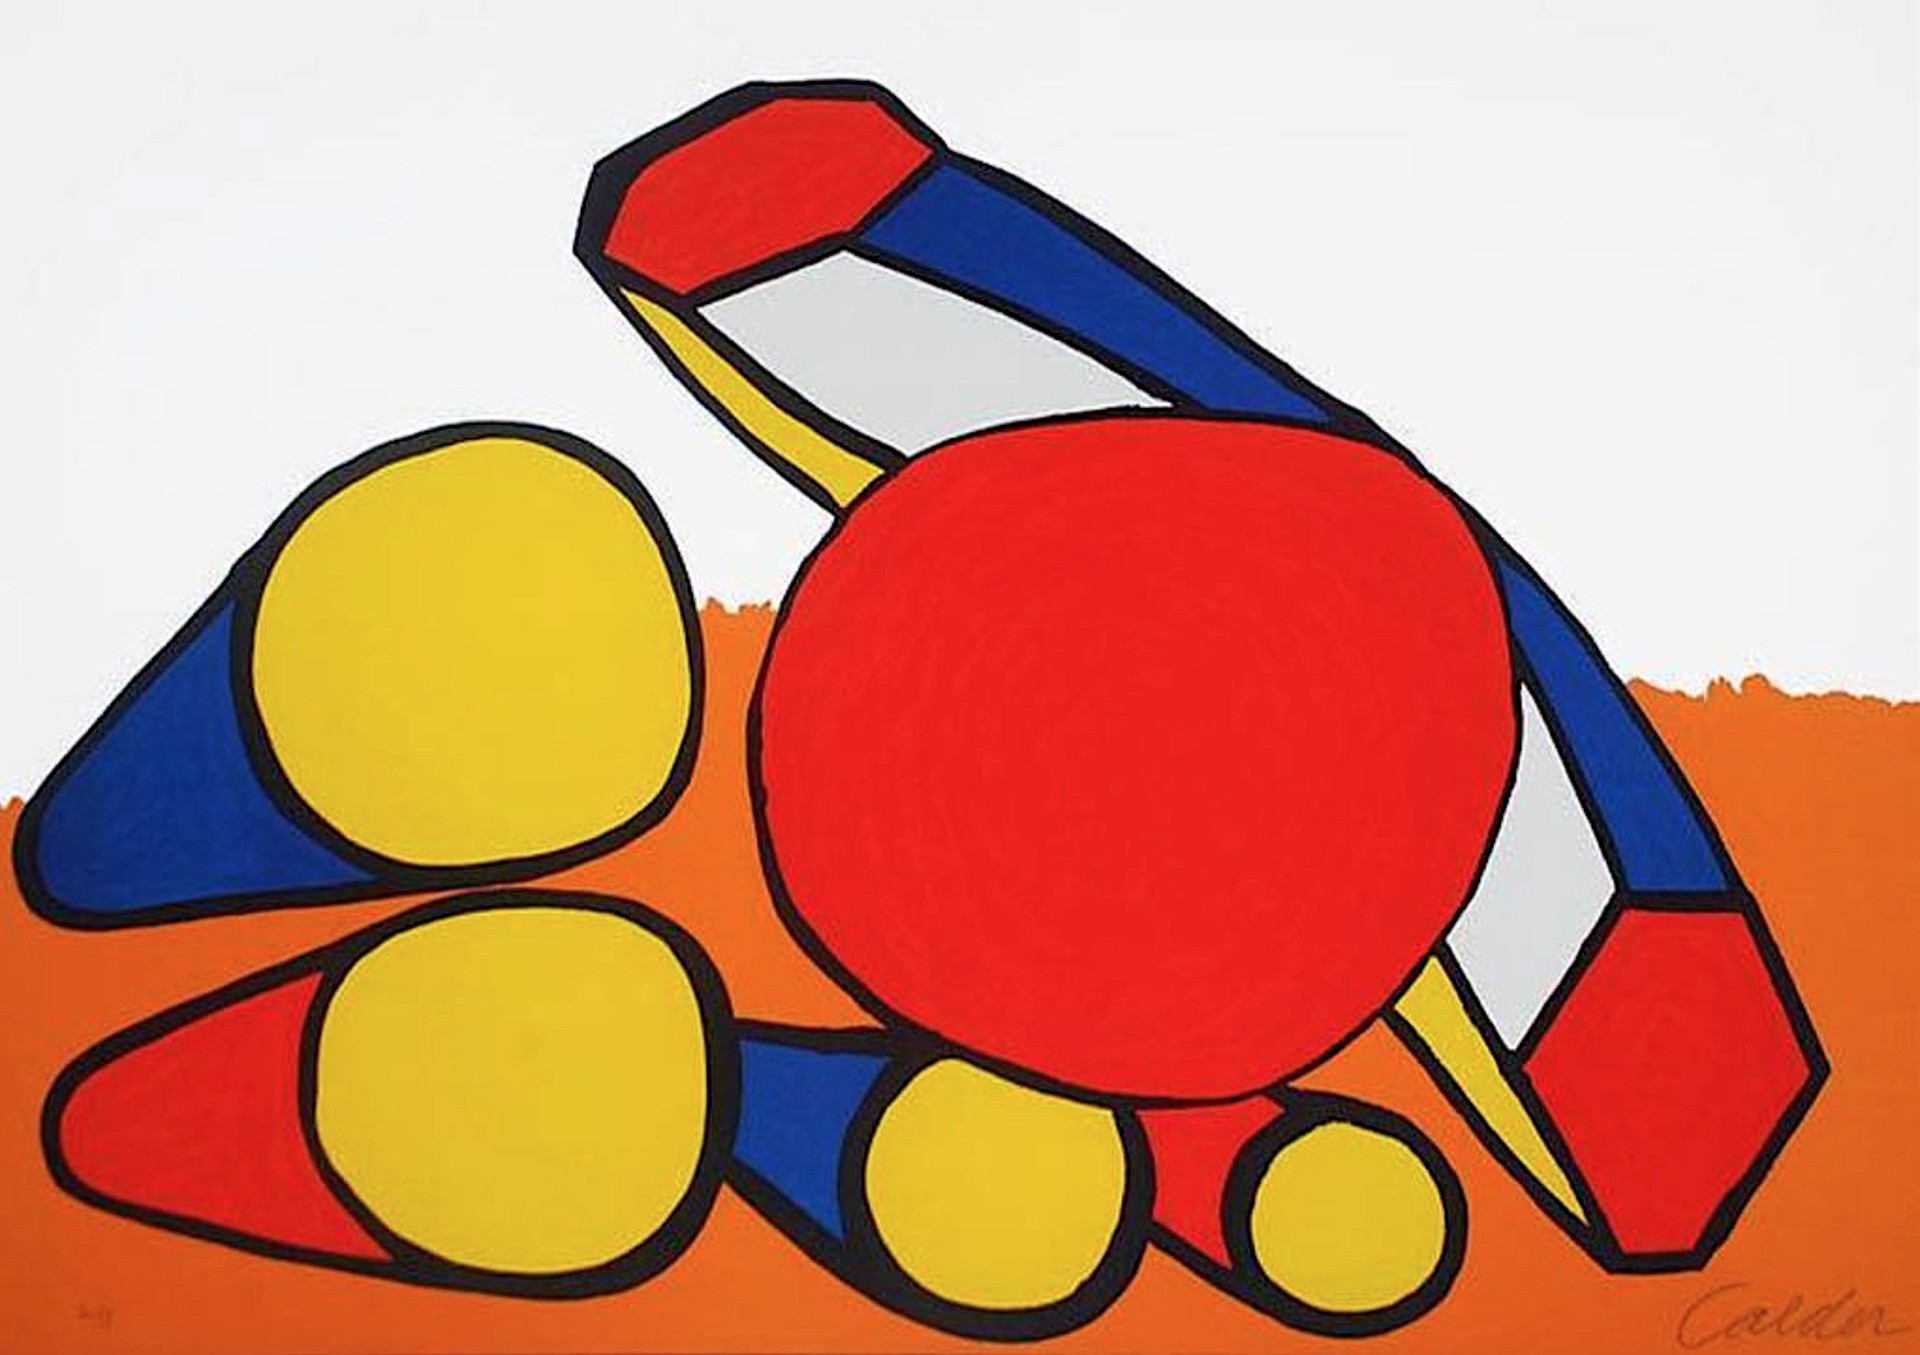 Composition with Circles and Tubes by Alexander Calder